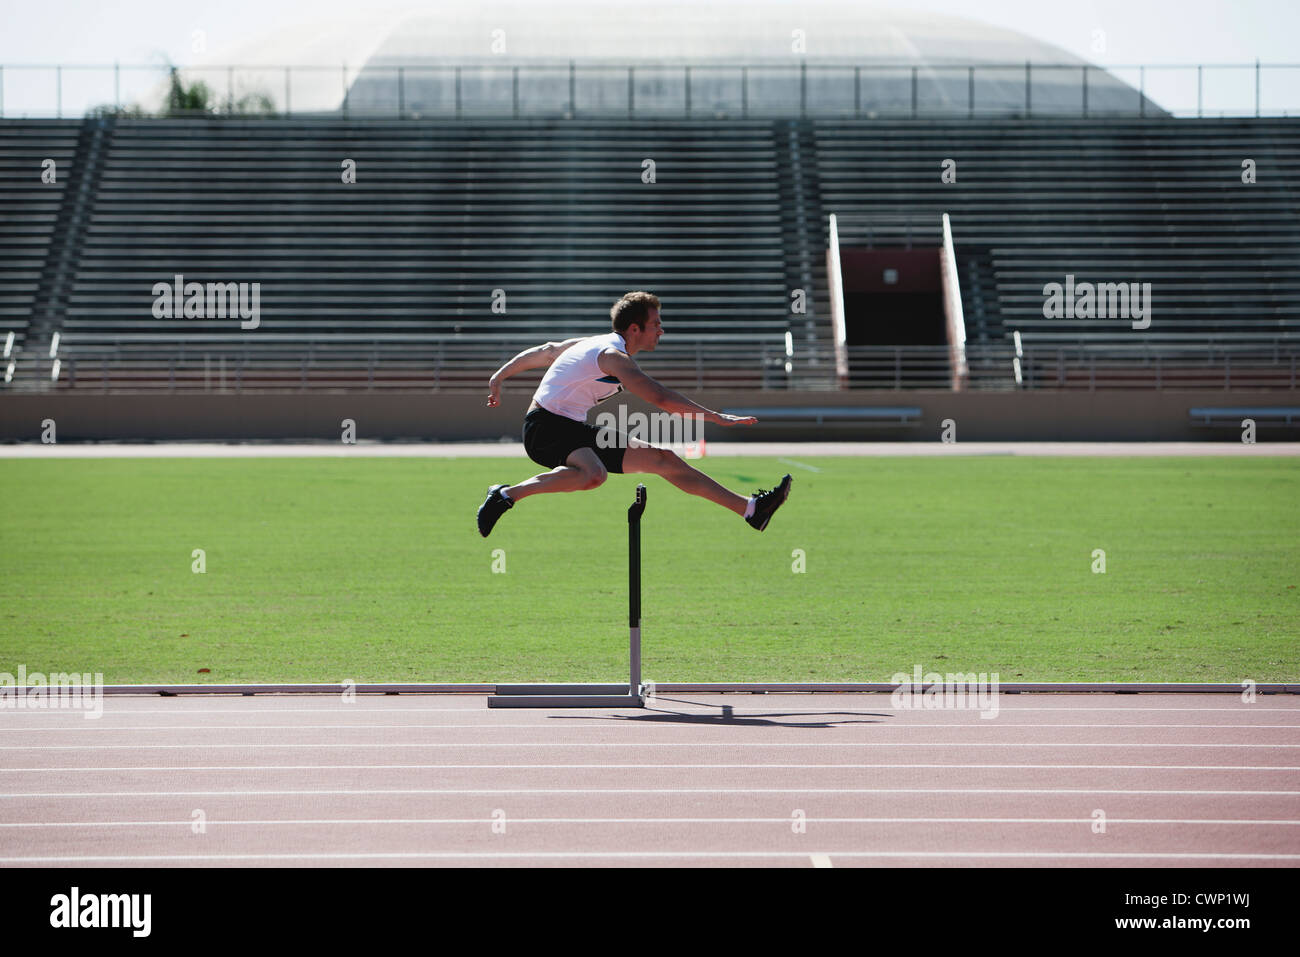 Male athlete clearing hurdle, side view Stock Photo